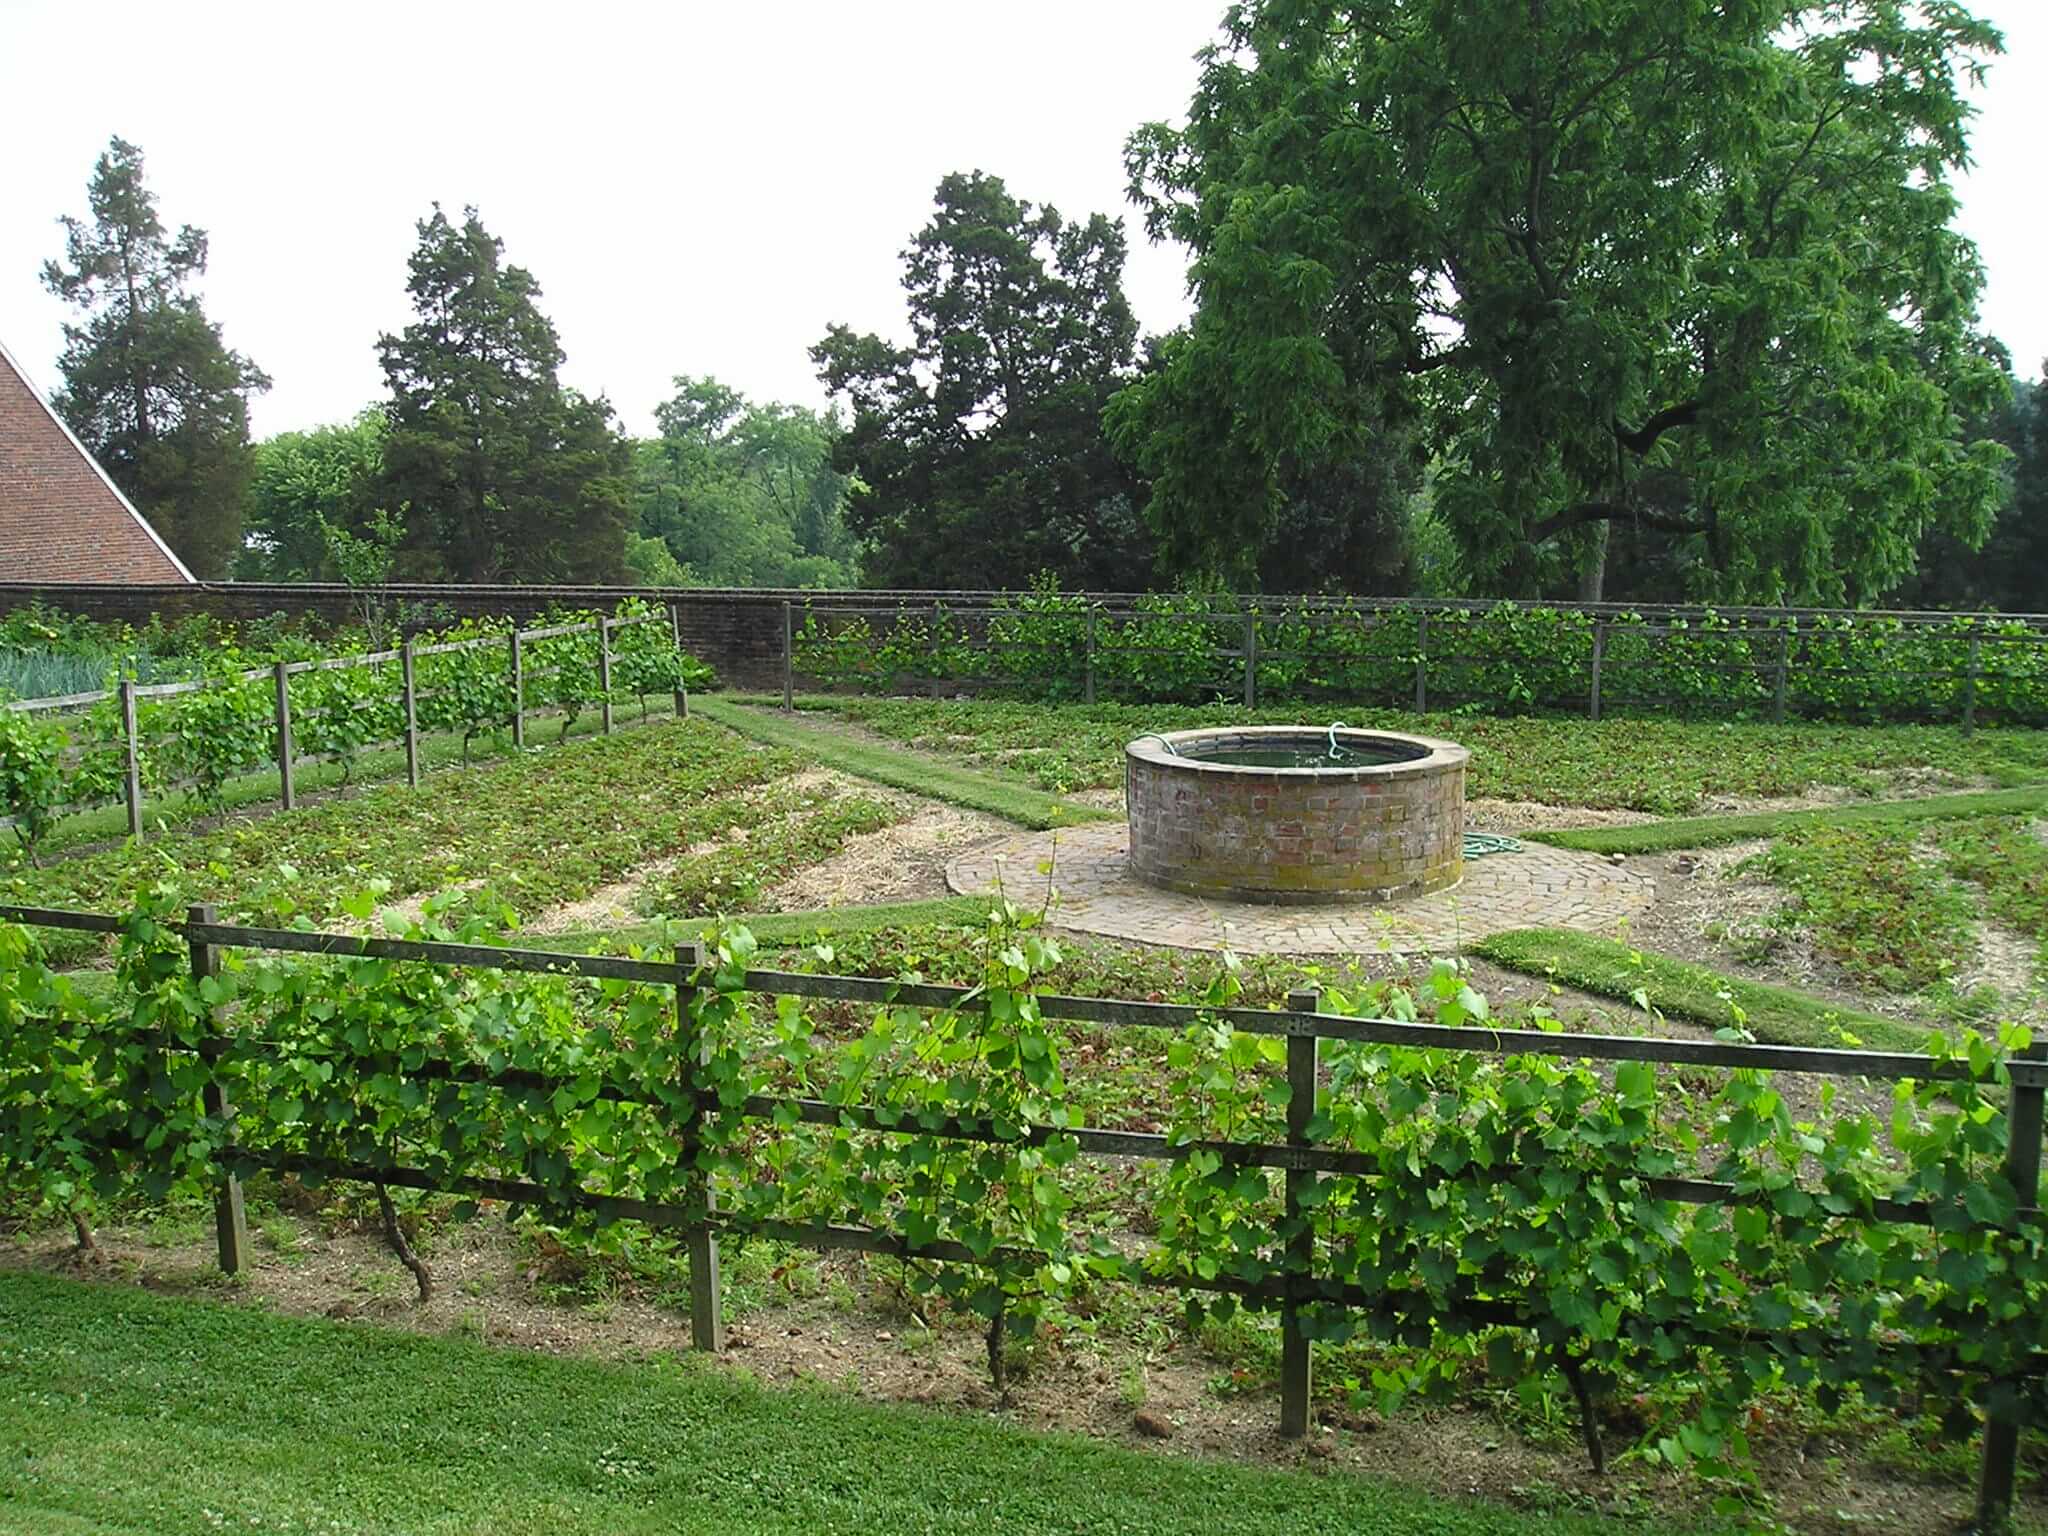 Colonial fencing surrounds the vegetable gardens at Mount Vernon in Virginia and supports well-pruned grape vines.